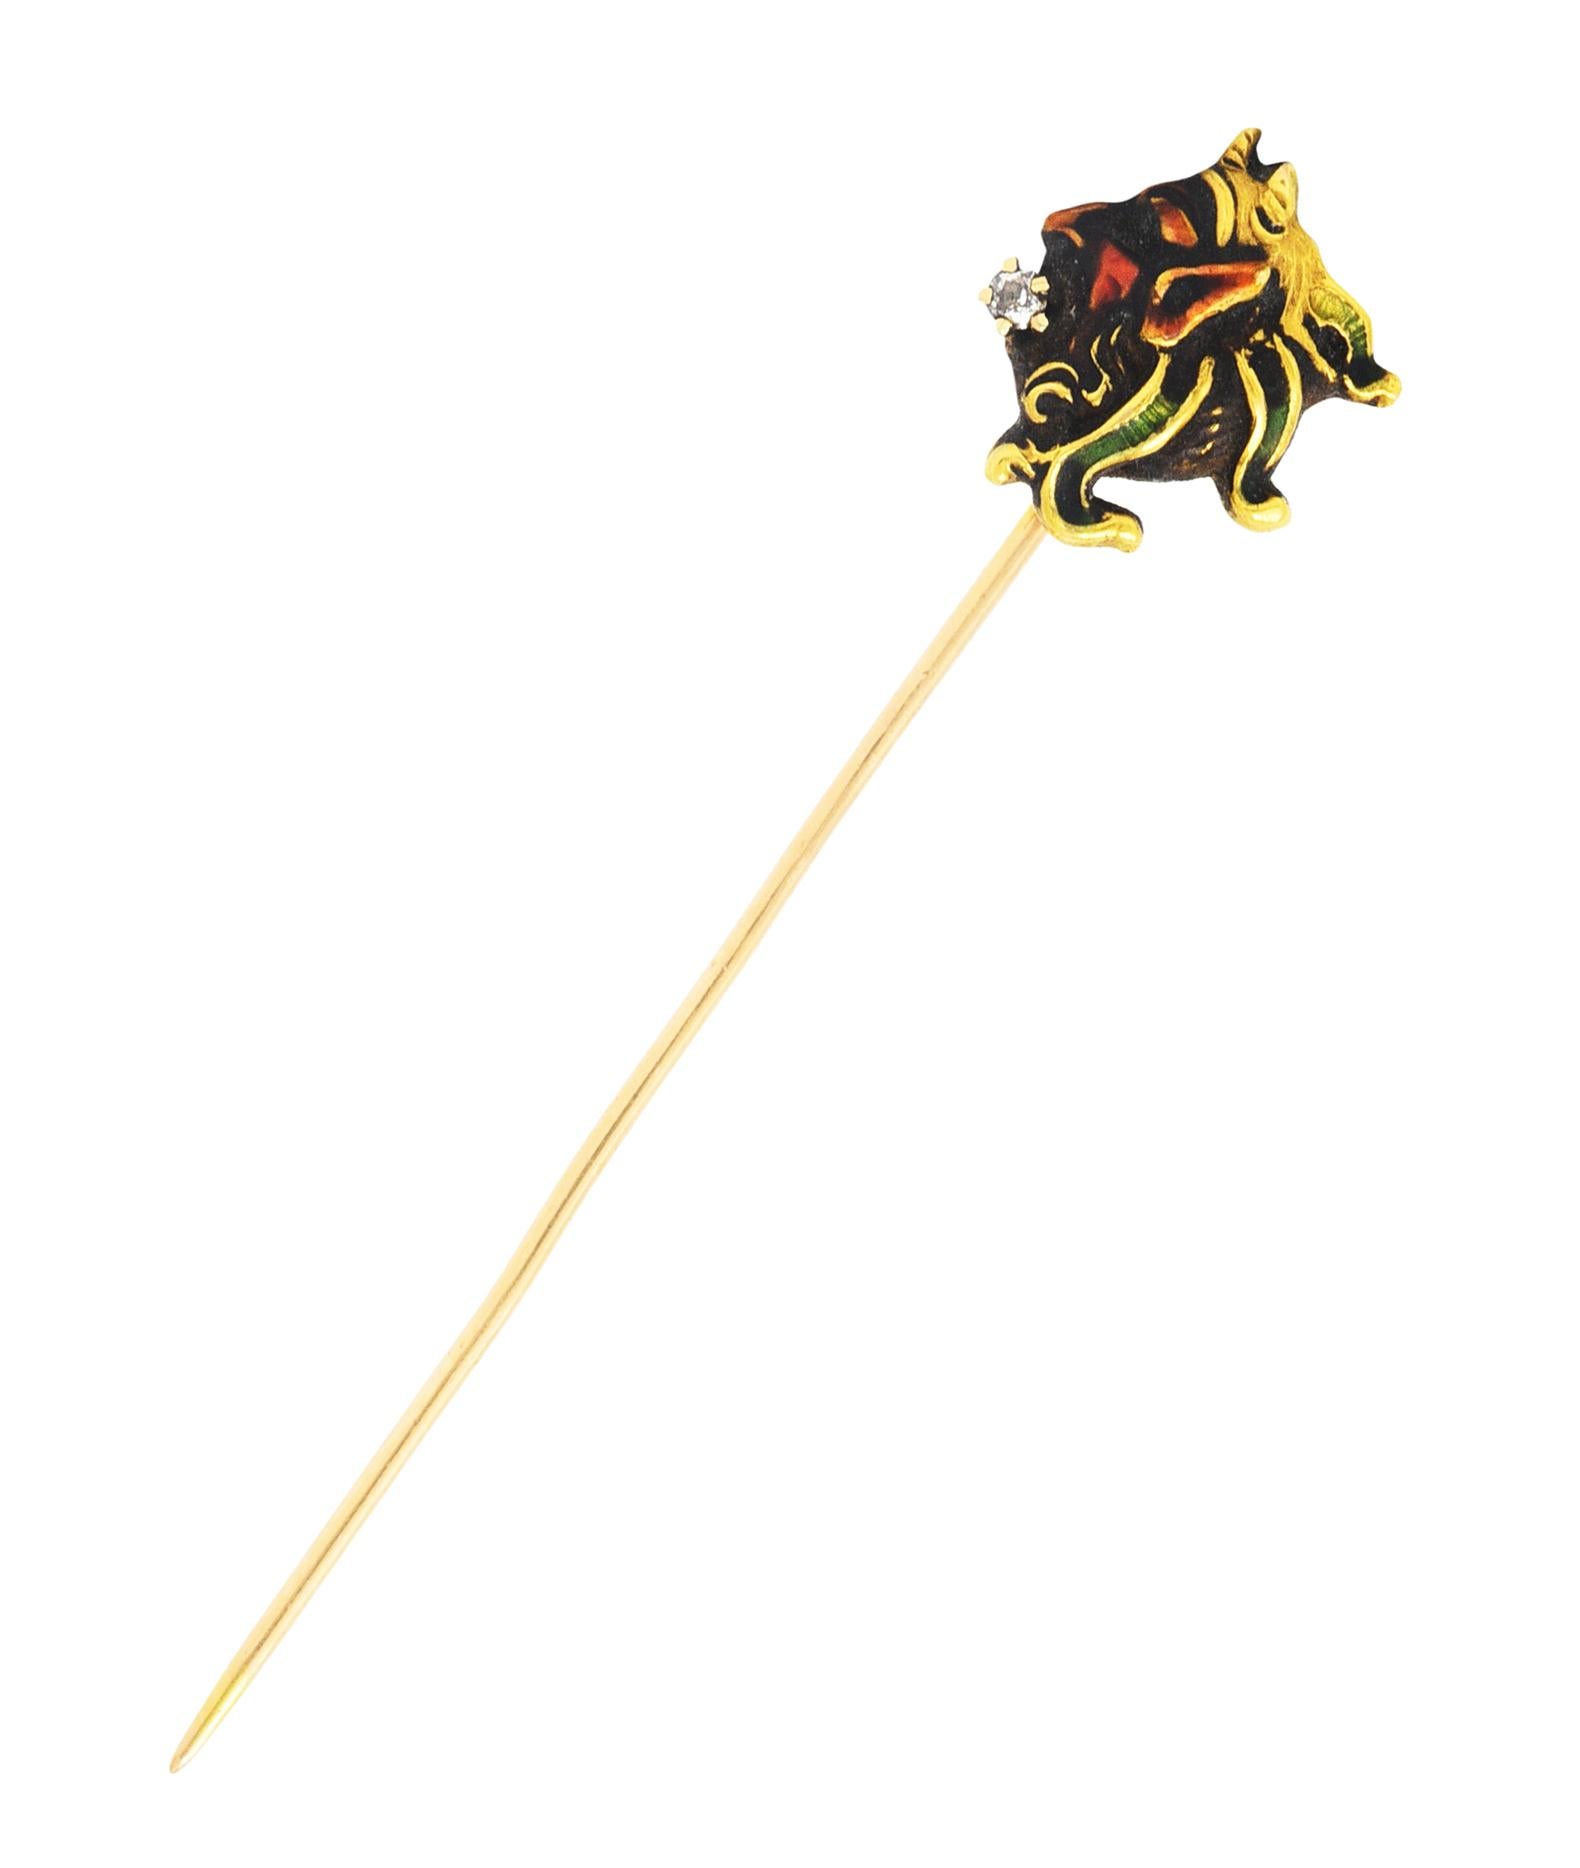 Stickpin designed as profile of the god Pan with curling hair and grooved horns

With orangey red and deep green enamel - quality consistent with age

Accented by prong set diamond in mouth

Eye clean and bright

Stamped 14k for 14 karat